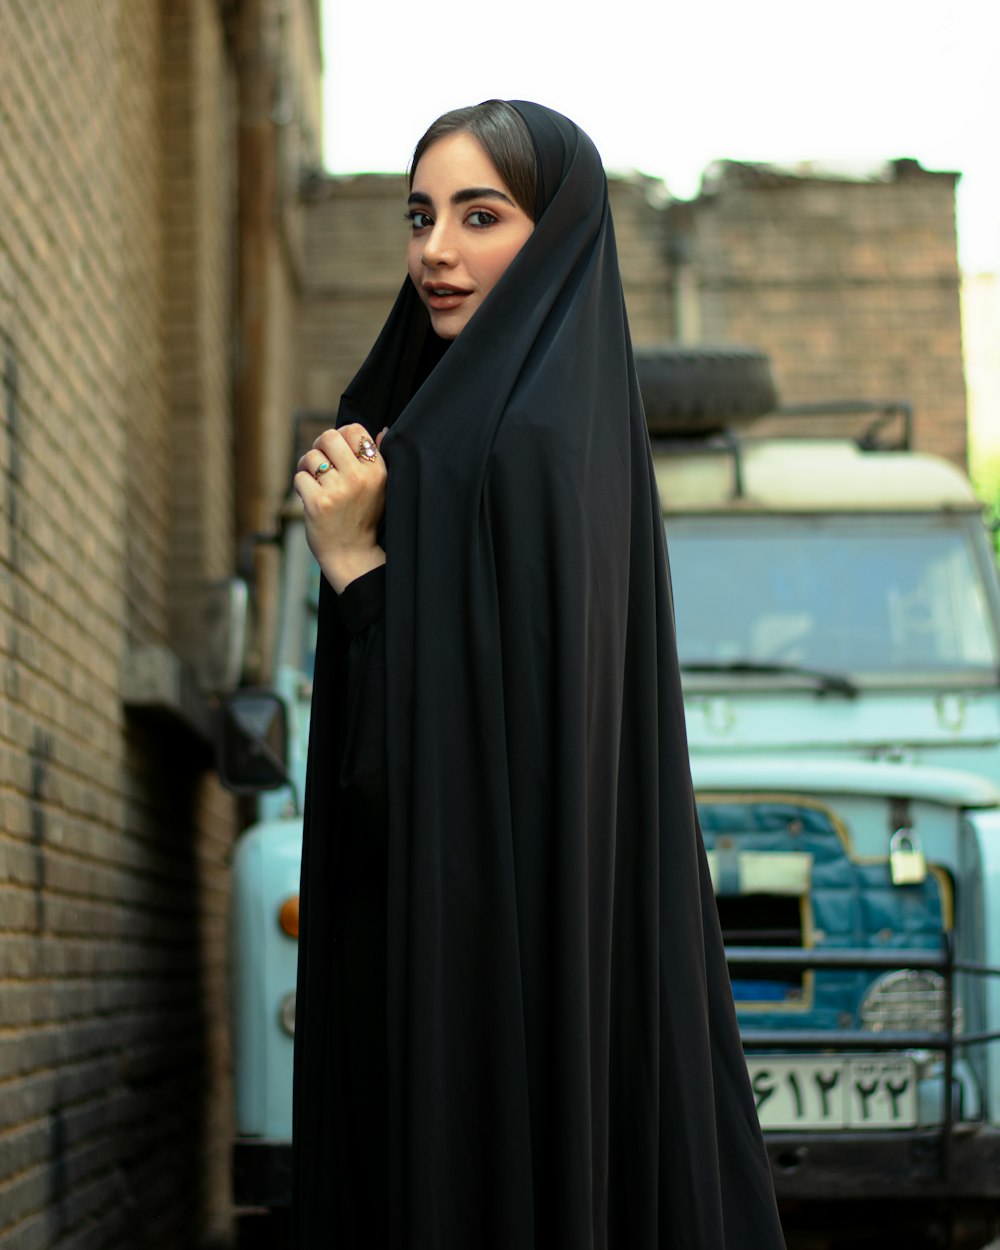 woman in black hijab standing near building during daytime